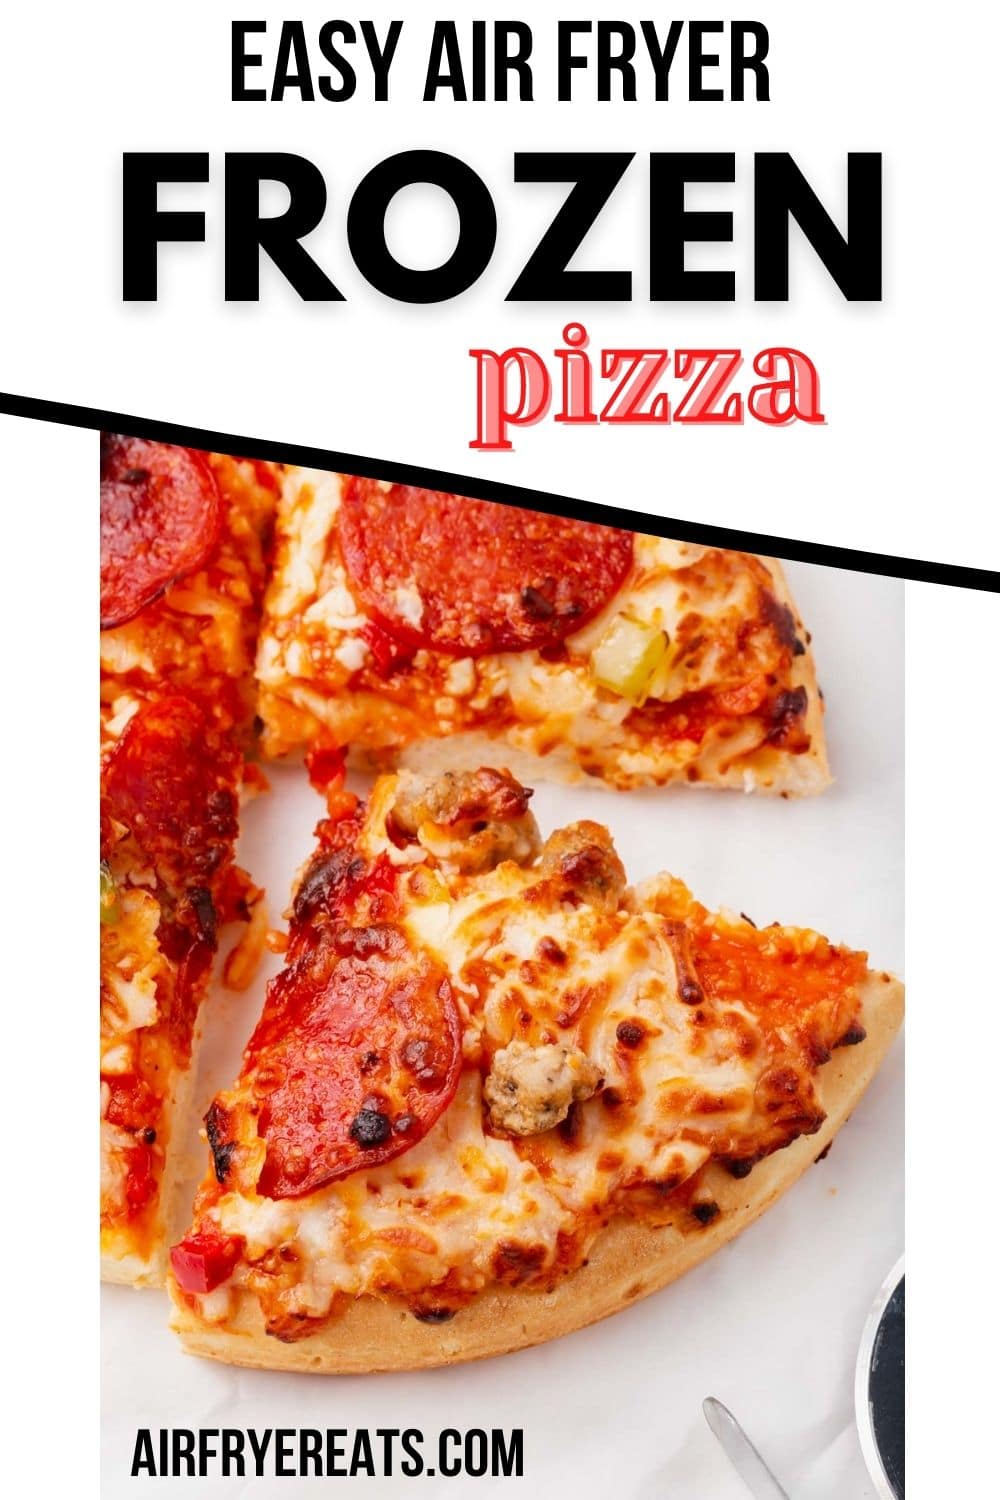 closeup view of a sliced personal sized pizza. Text at top says easy air fryer frozen pizza